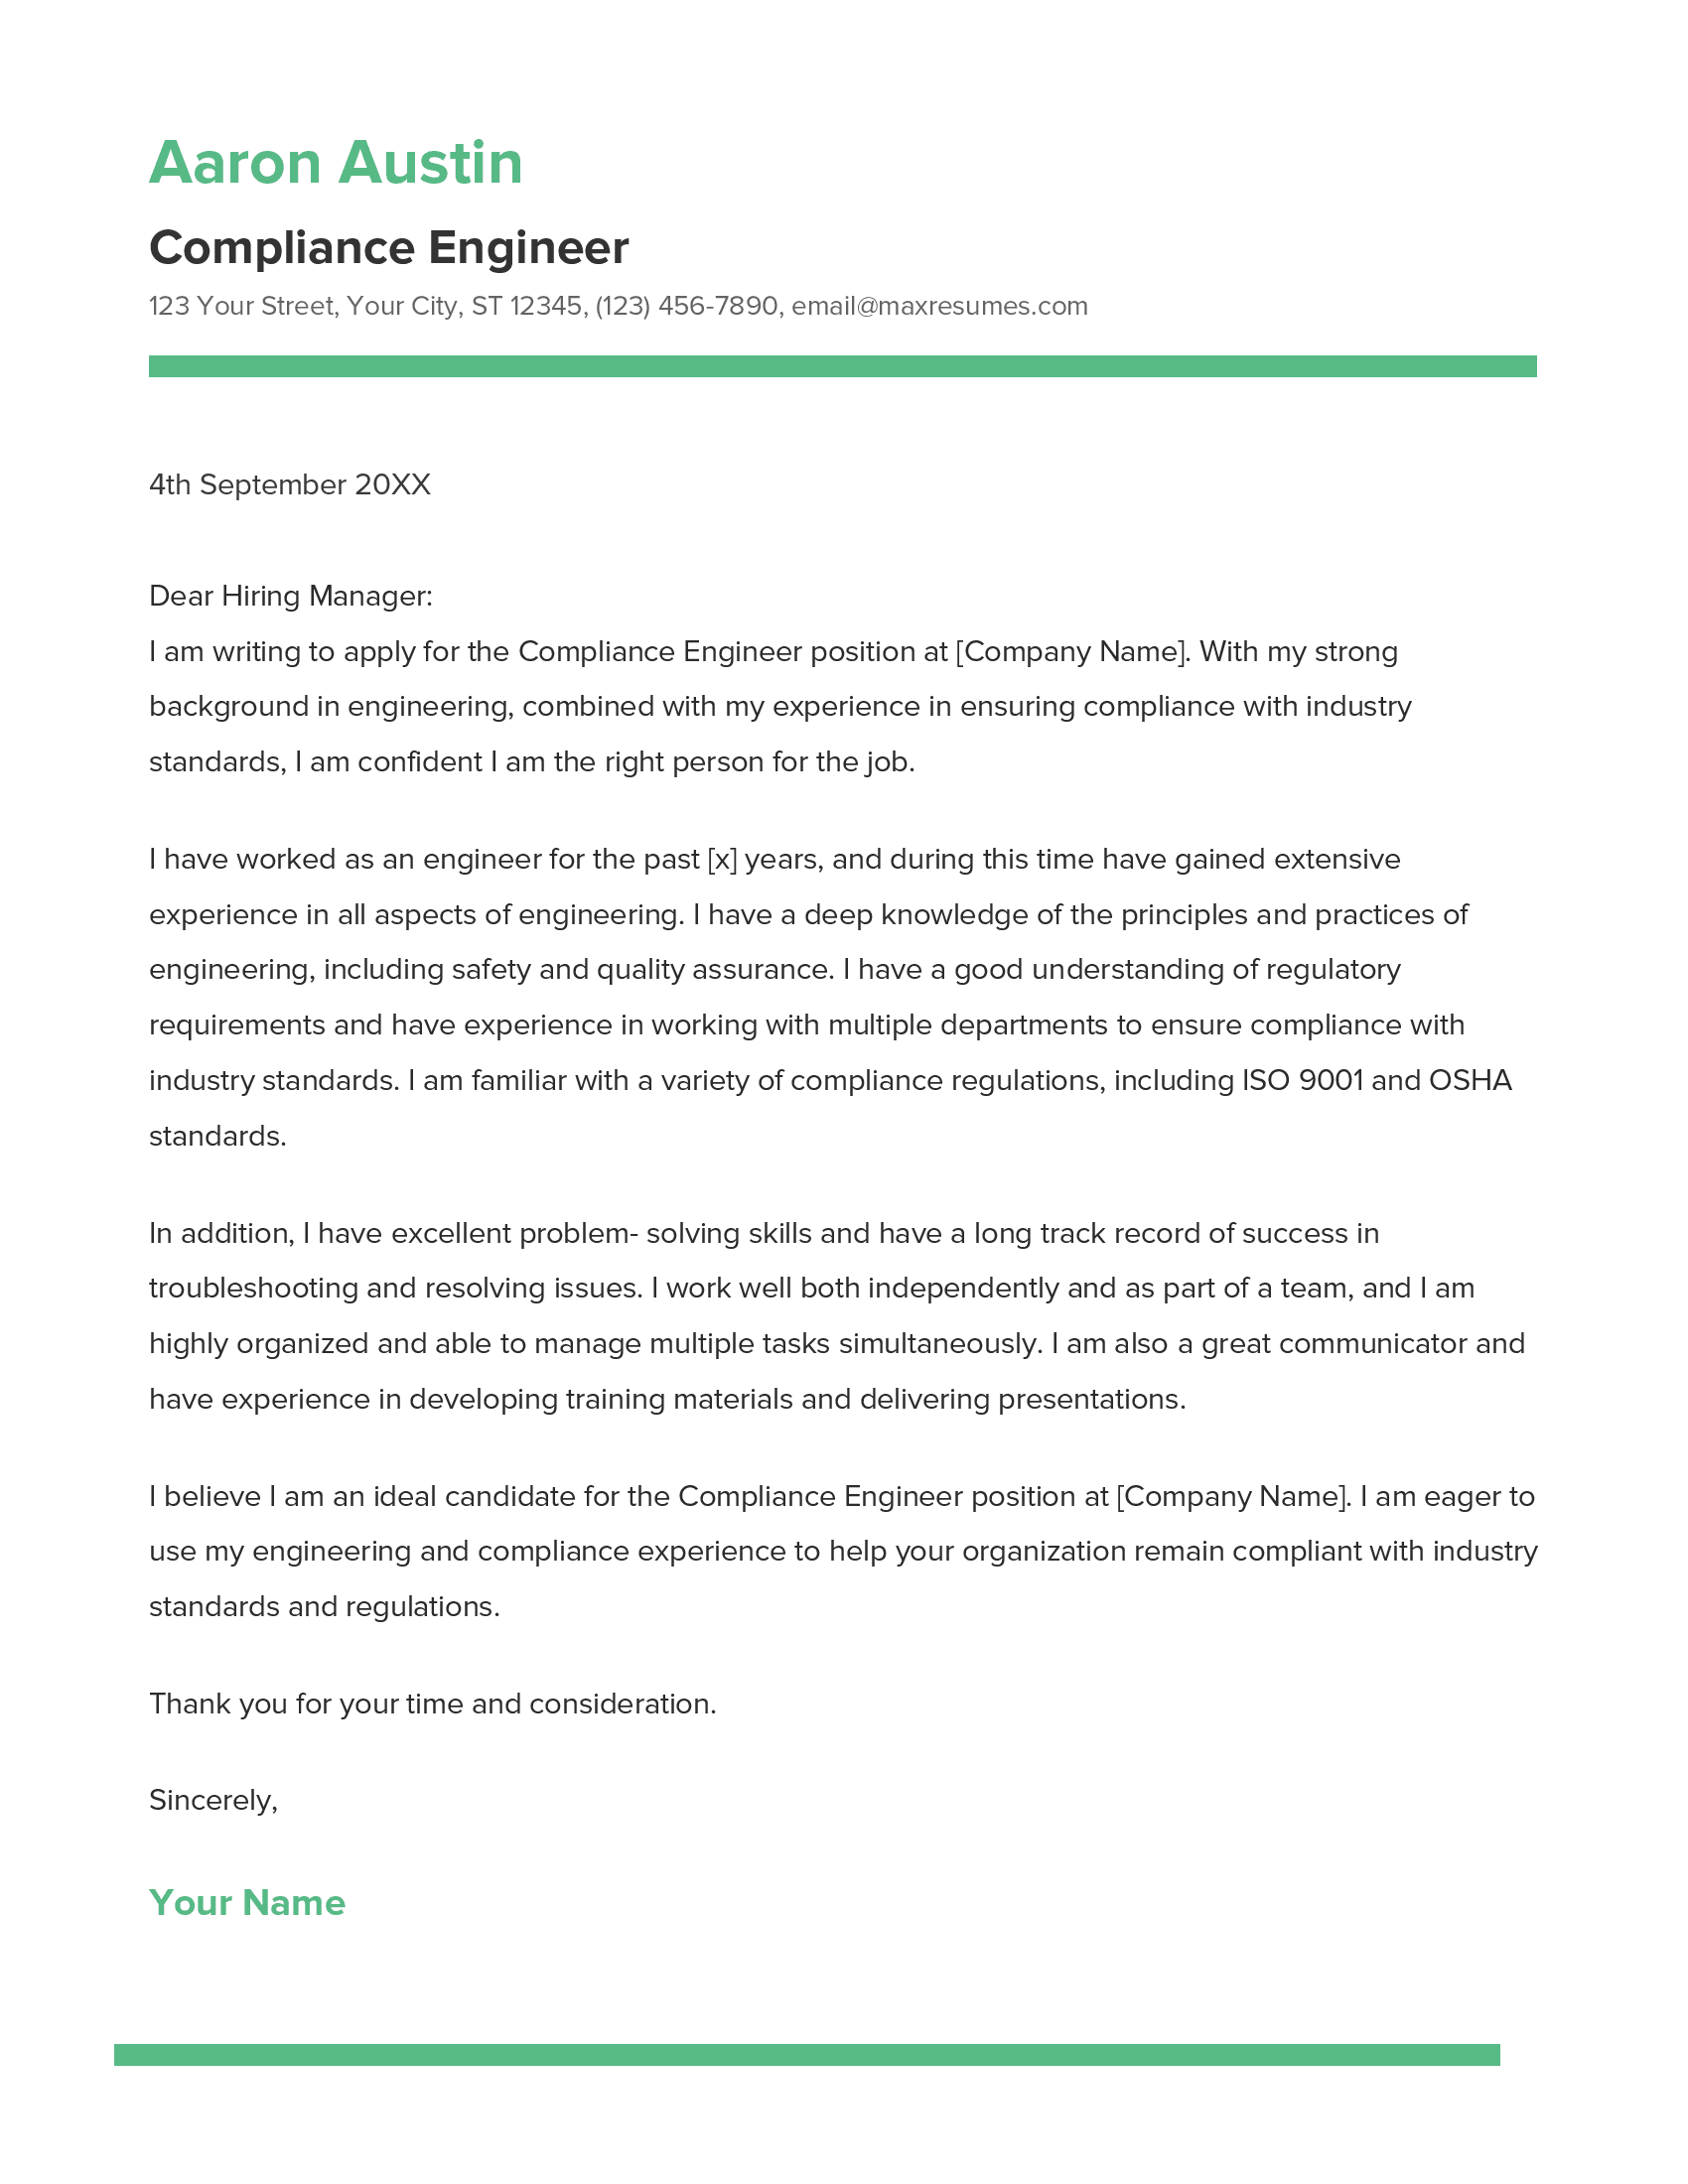 Compliance Engineer Cover Letter Example